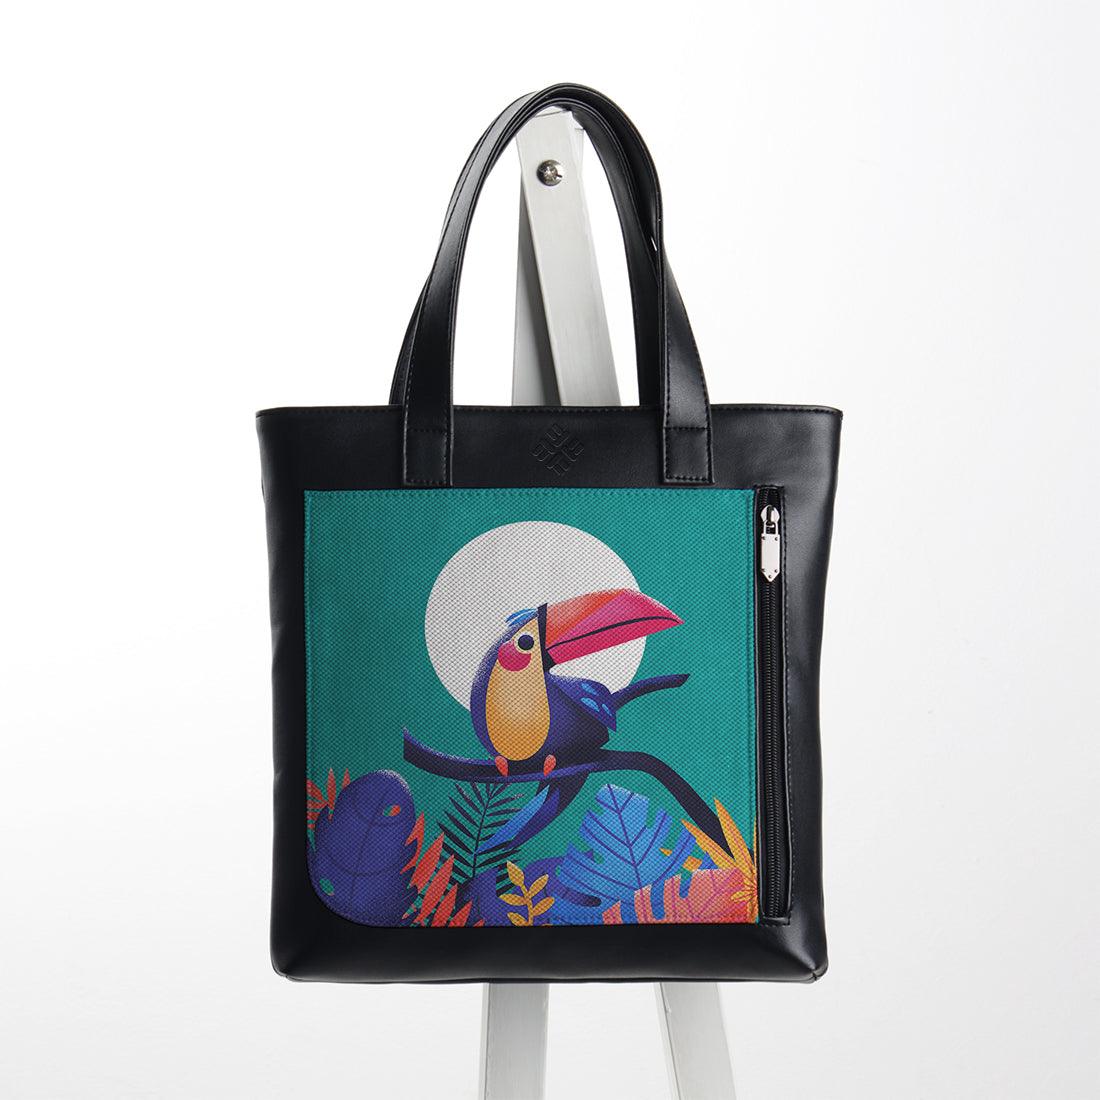 Leather Tote bag tropical bird